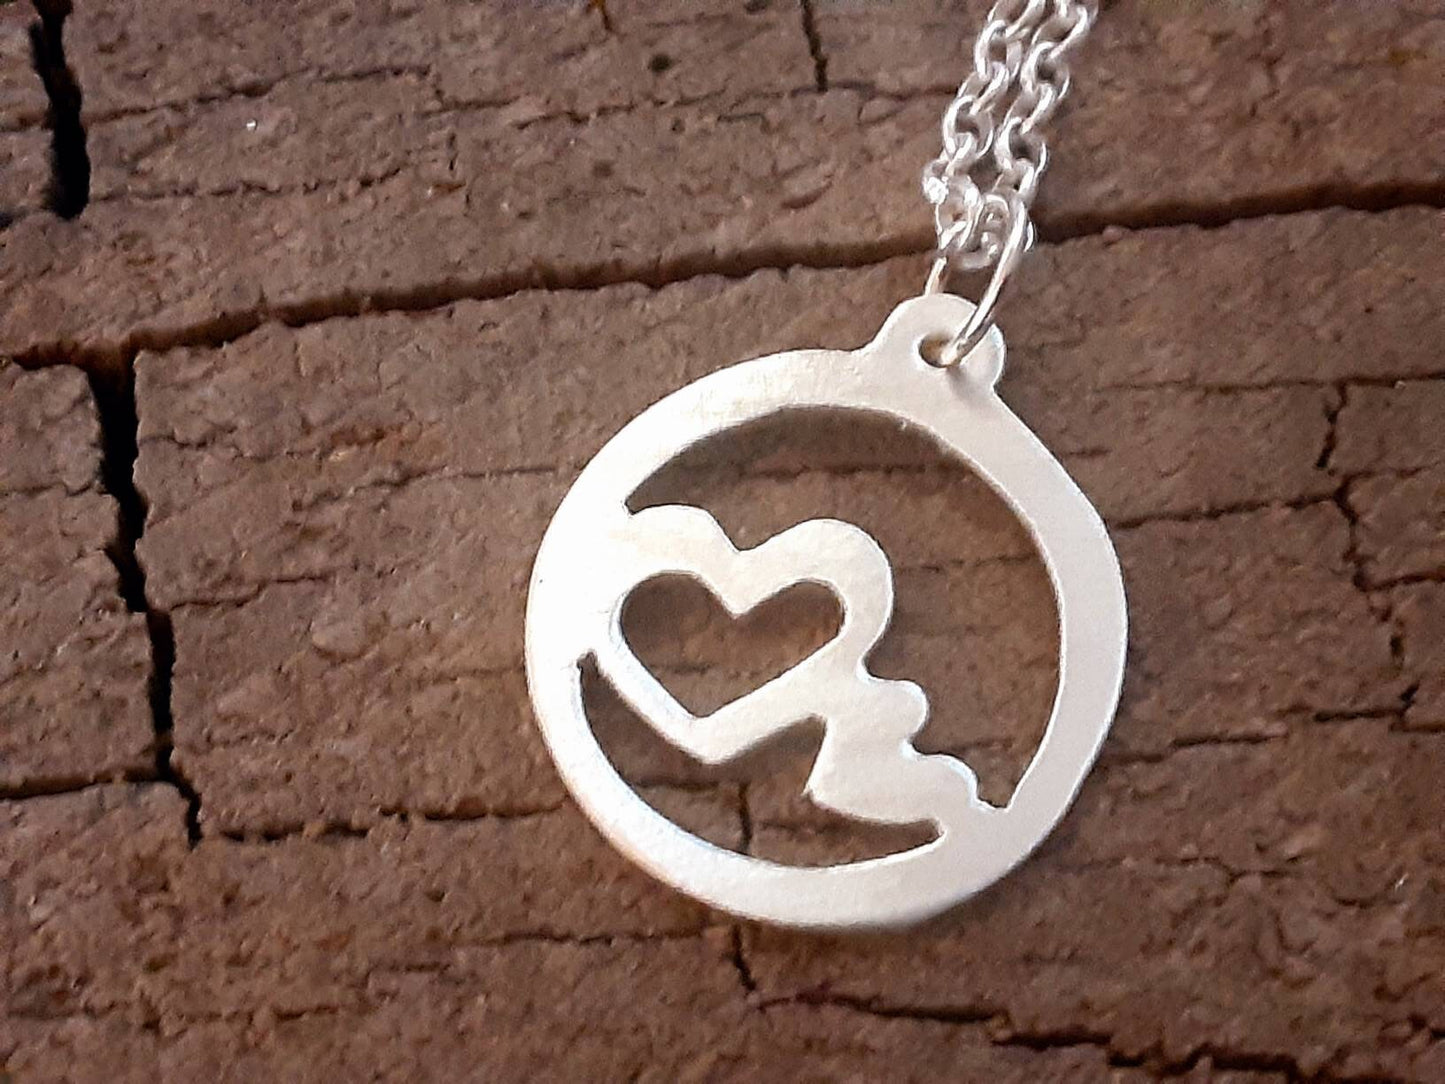 Sterling silver heart charm necklace